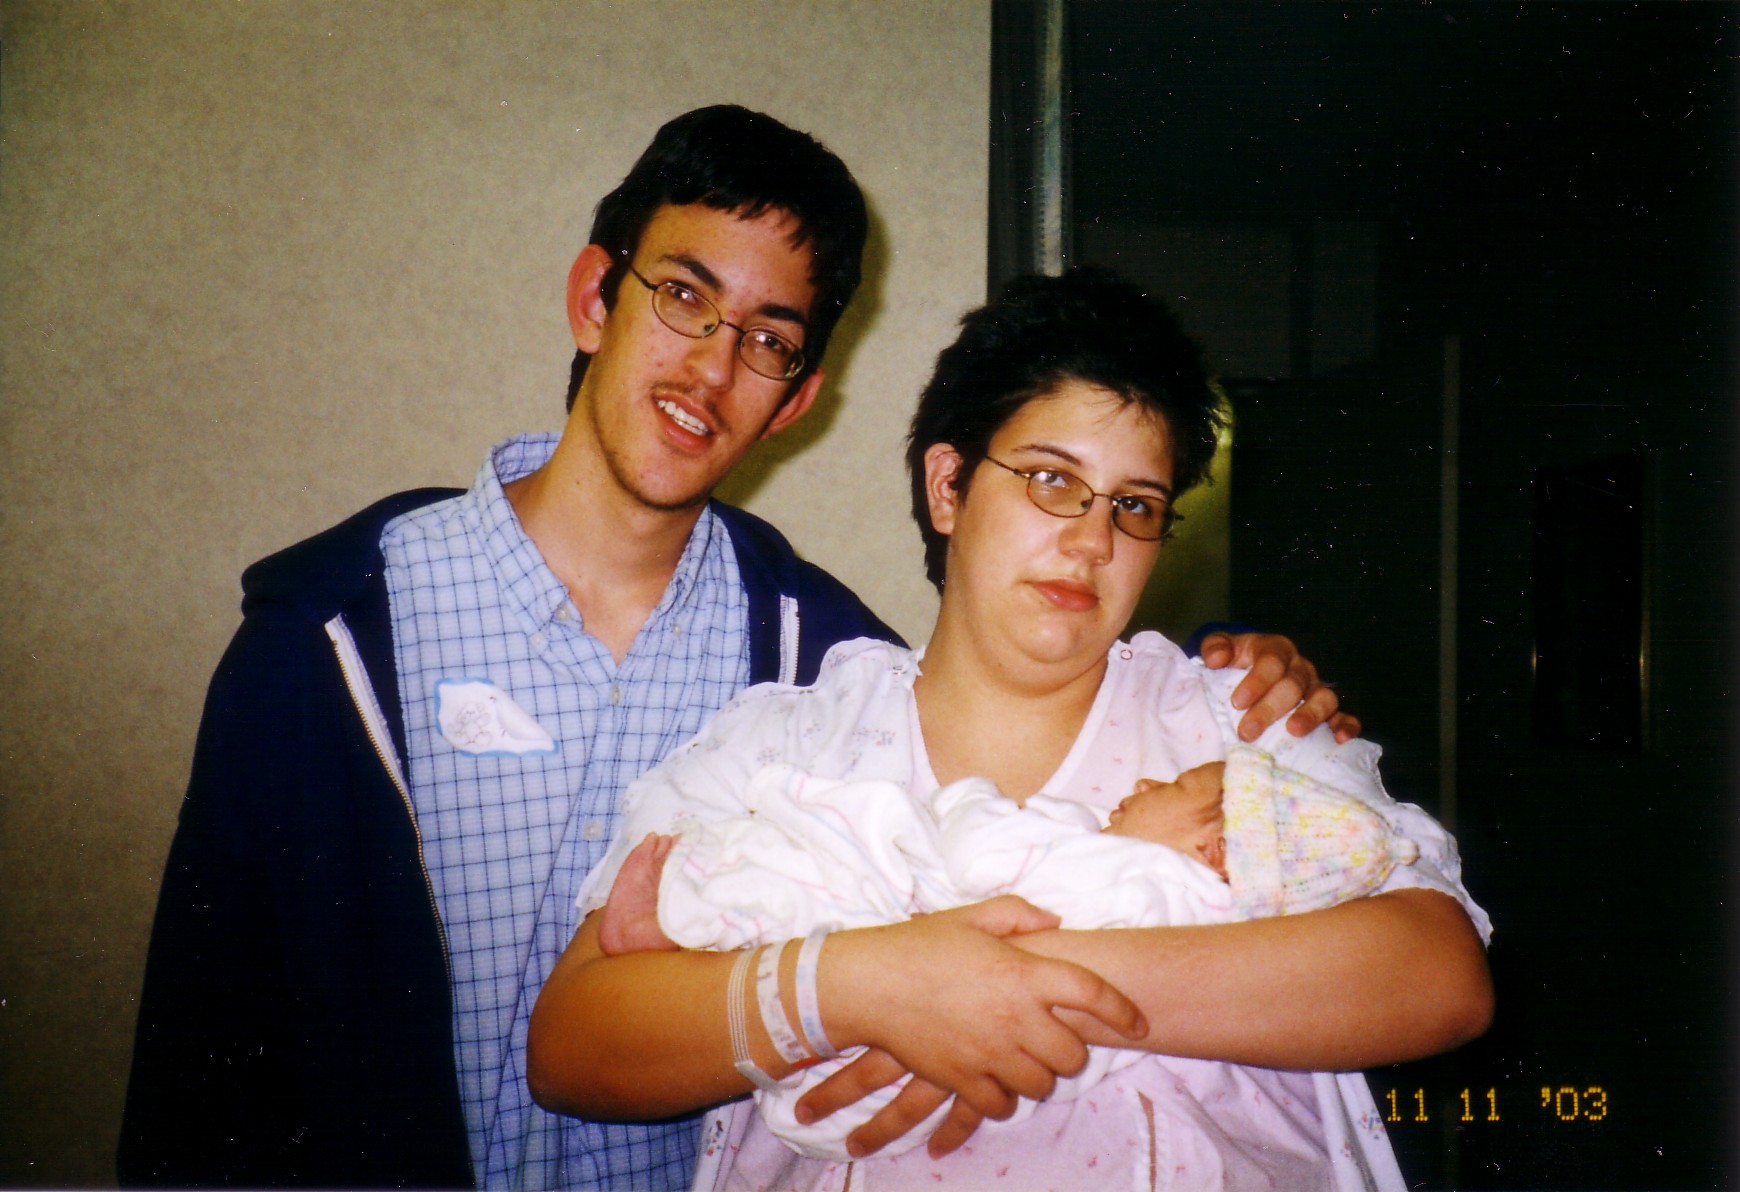 picture of my son (born 11/11/03)and me and my girlfriend